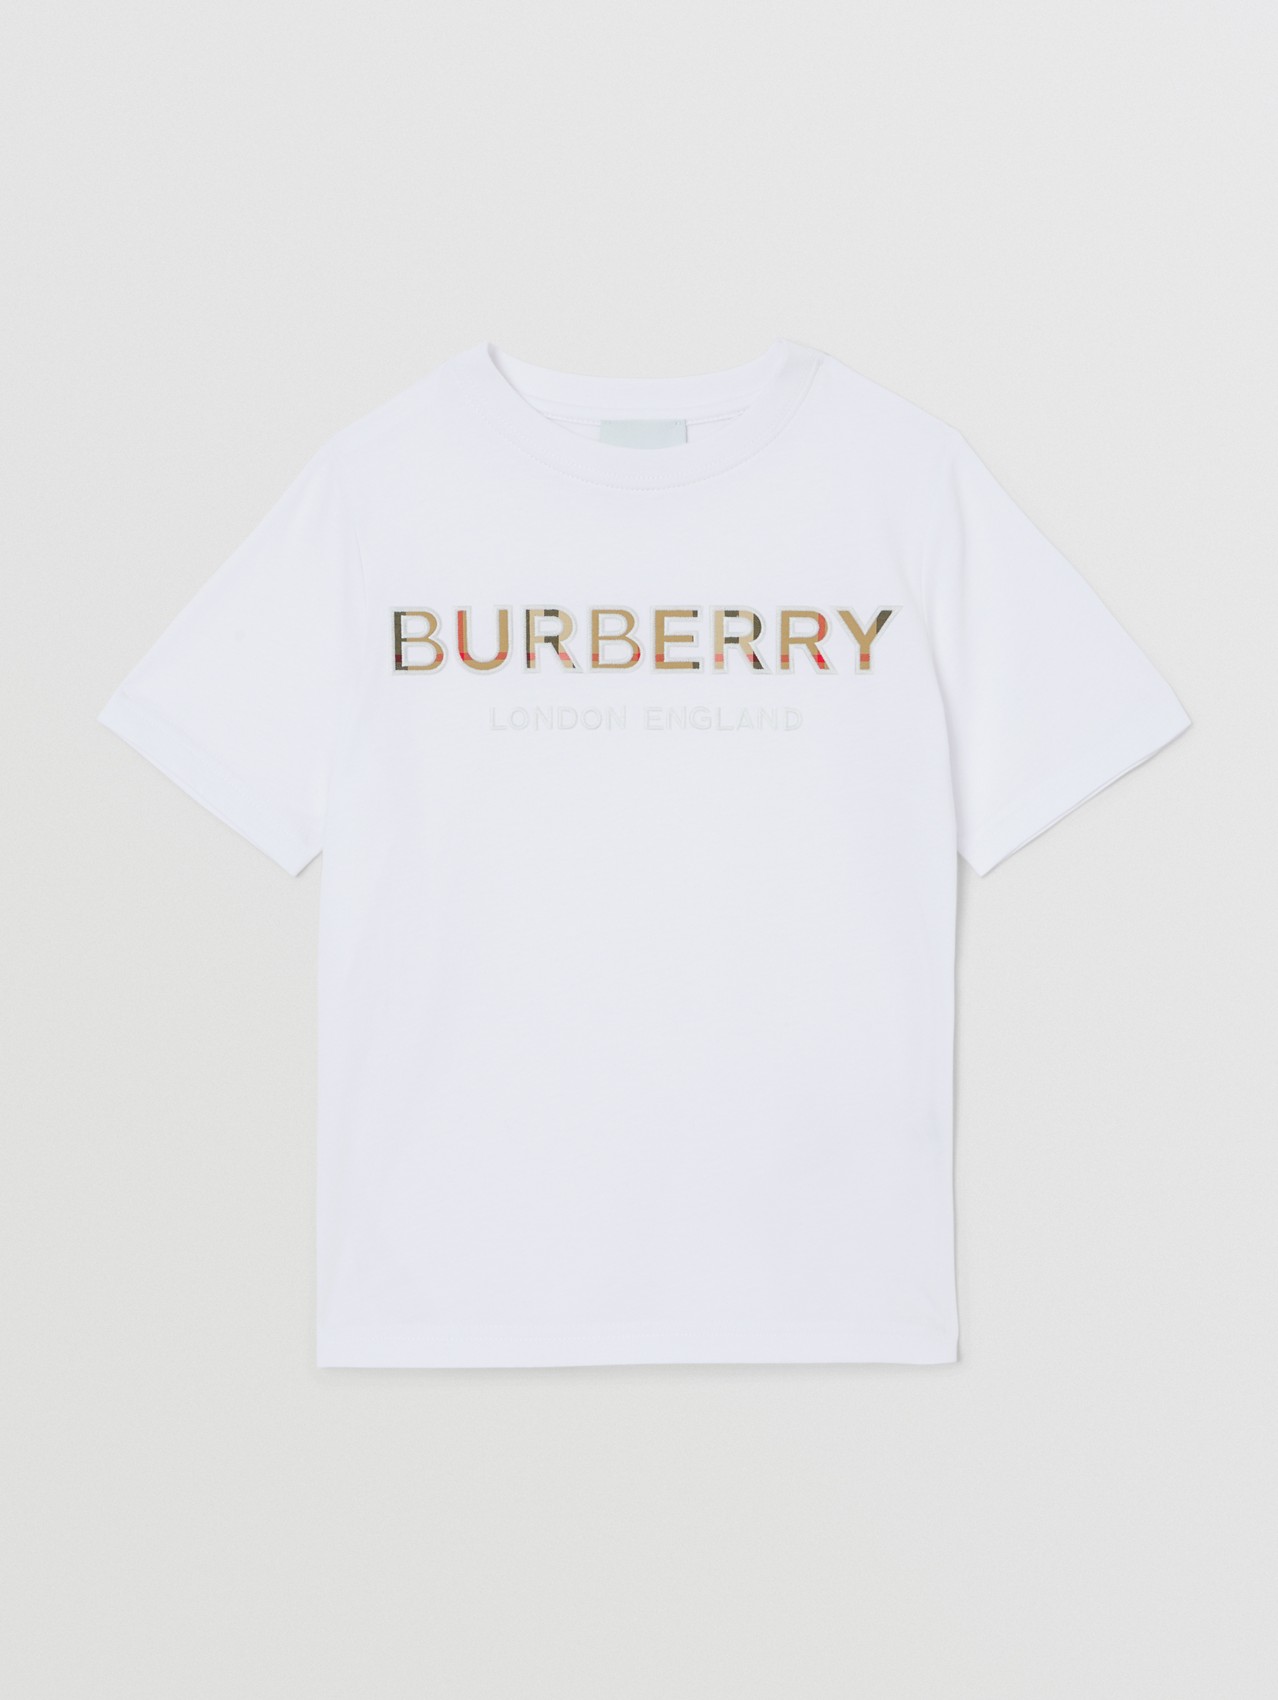 Kids Baby Burberry Clothing Burberry Kids Tops Burberry Kids Tops T-shirts Burberry Kids T-shirts Burberry Kids Top Tops T-shirt BURBERRY 6 months white 